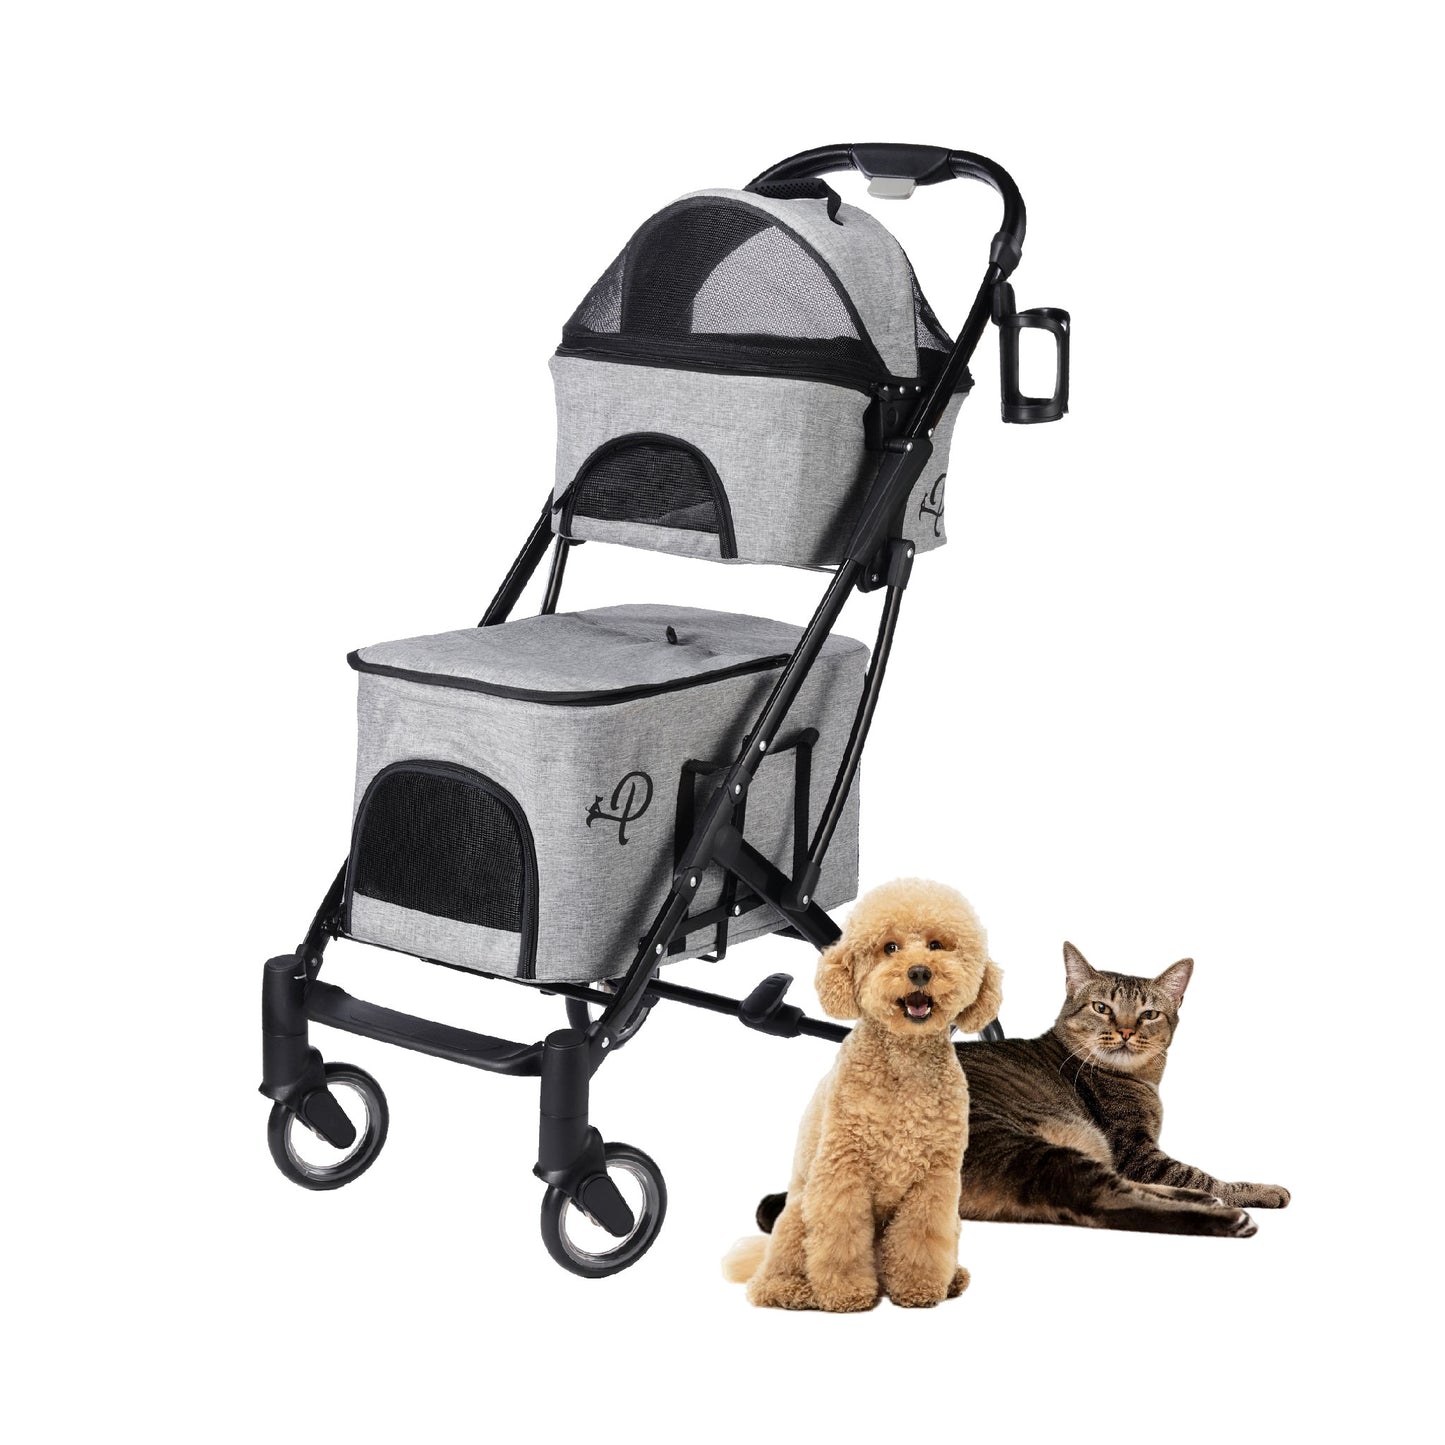 Deluxe Double Decker Pet Stroller - Dual Bassinets, Washable Pee Pads, Adjustable Leashes, Mesh Windows, Cup Holders, Storage Pockets, One-Hand Fold, Lightweight for Dogs/Cats/Pets